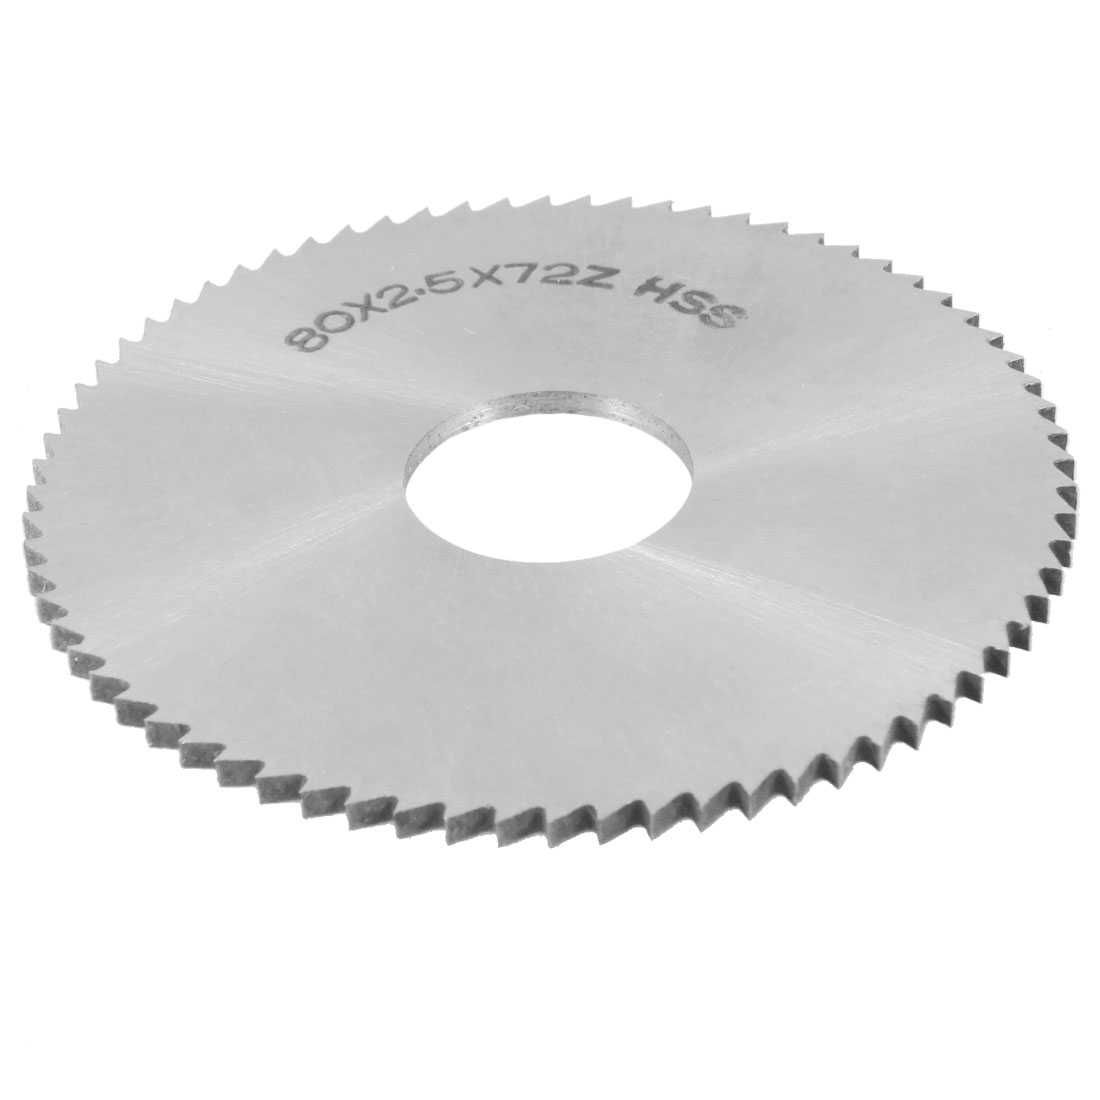 Unique Bargains Unique Bargains 80mm OD 2.5mm Thickness HSS 72T Slitting Saw Blade Cutting Tool